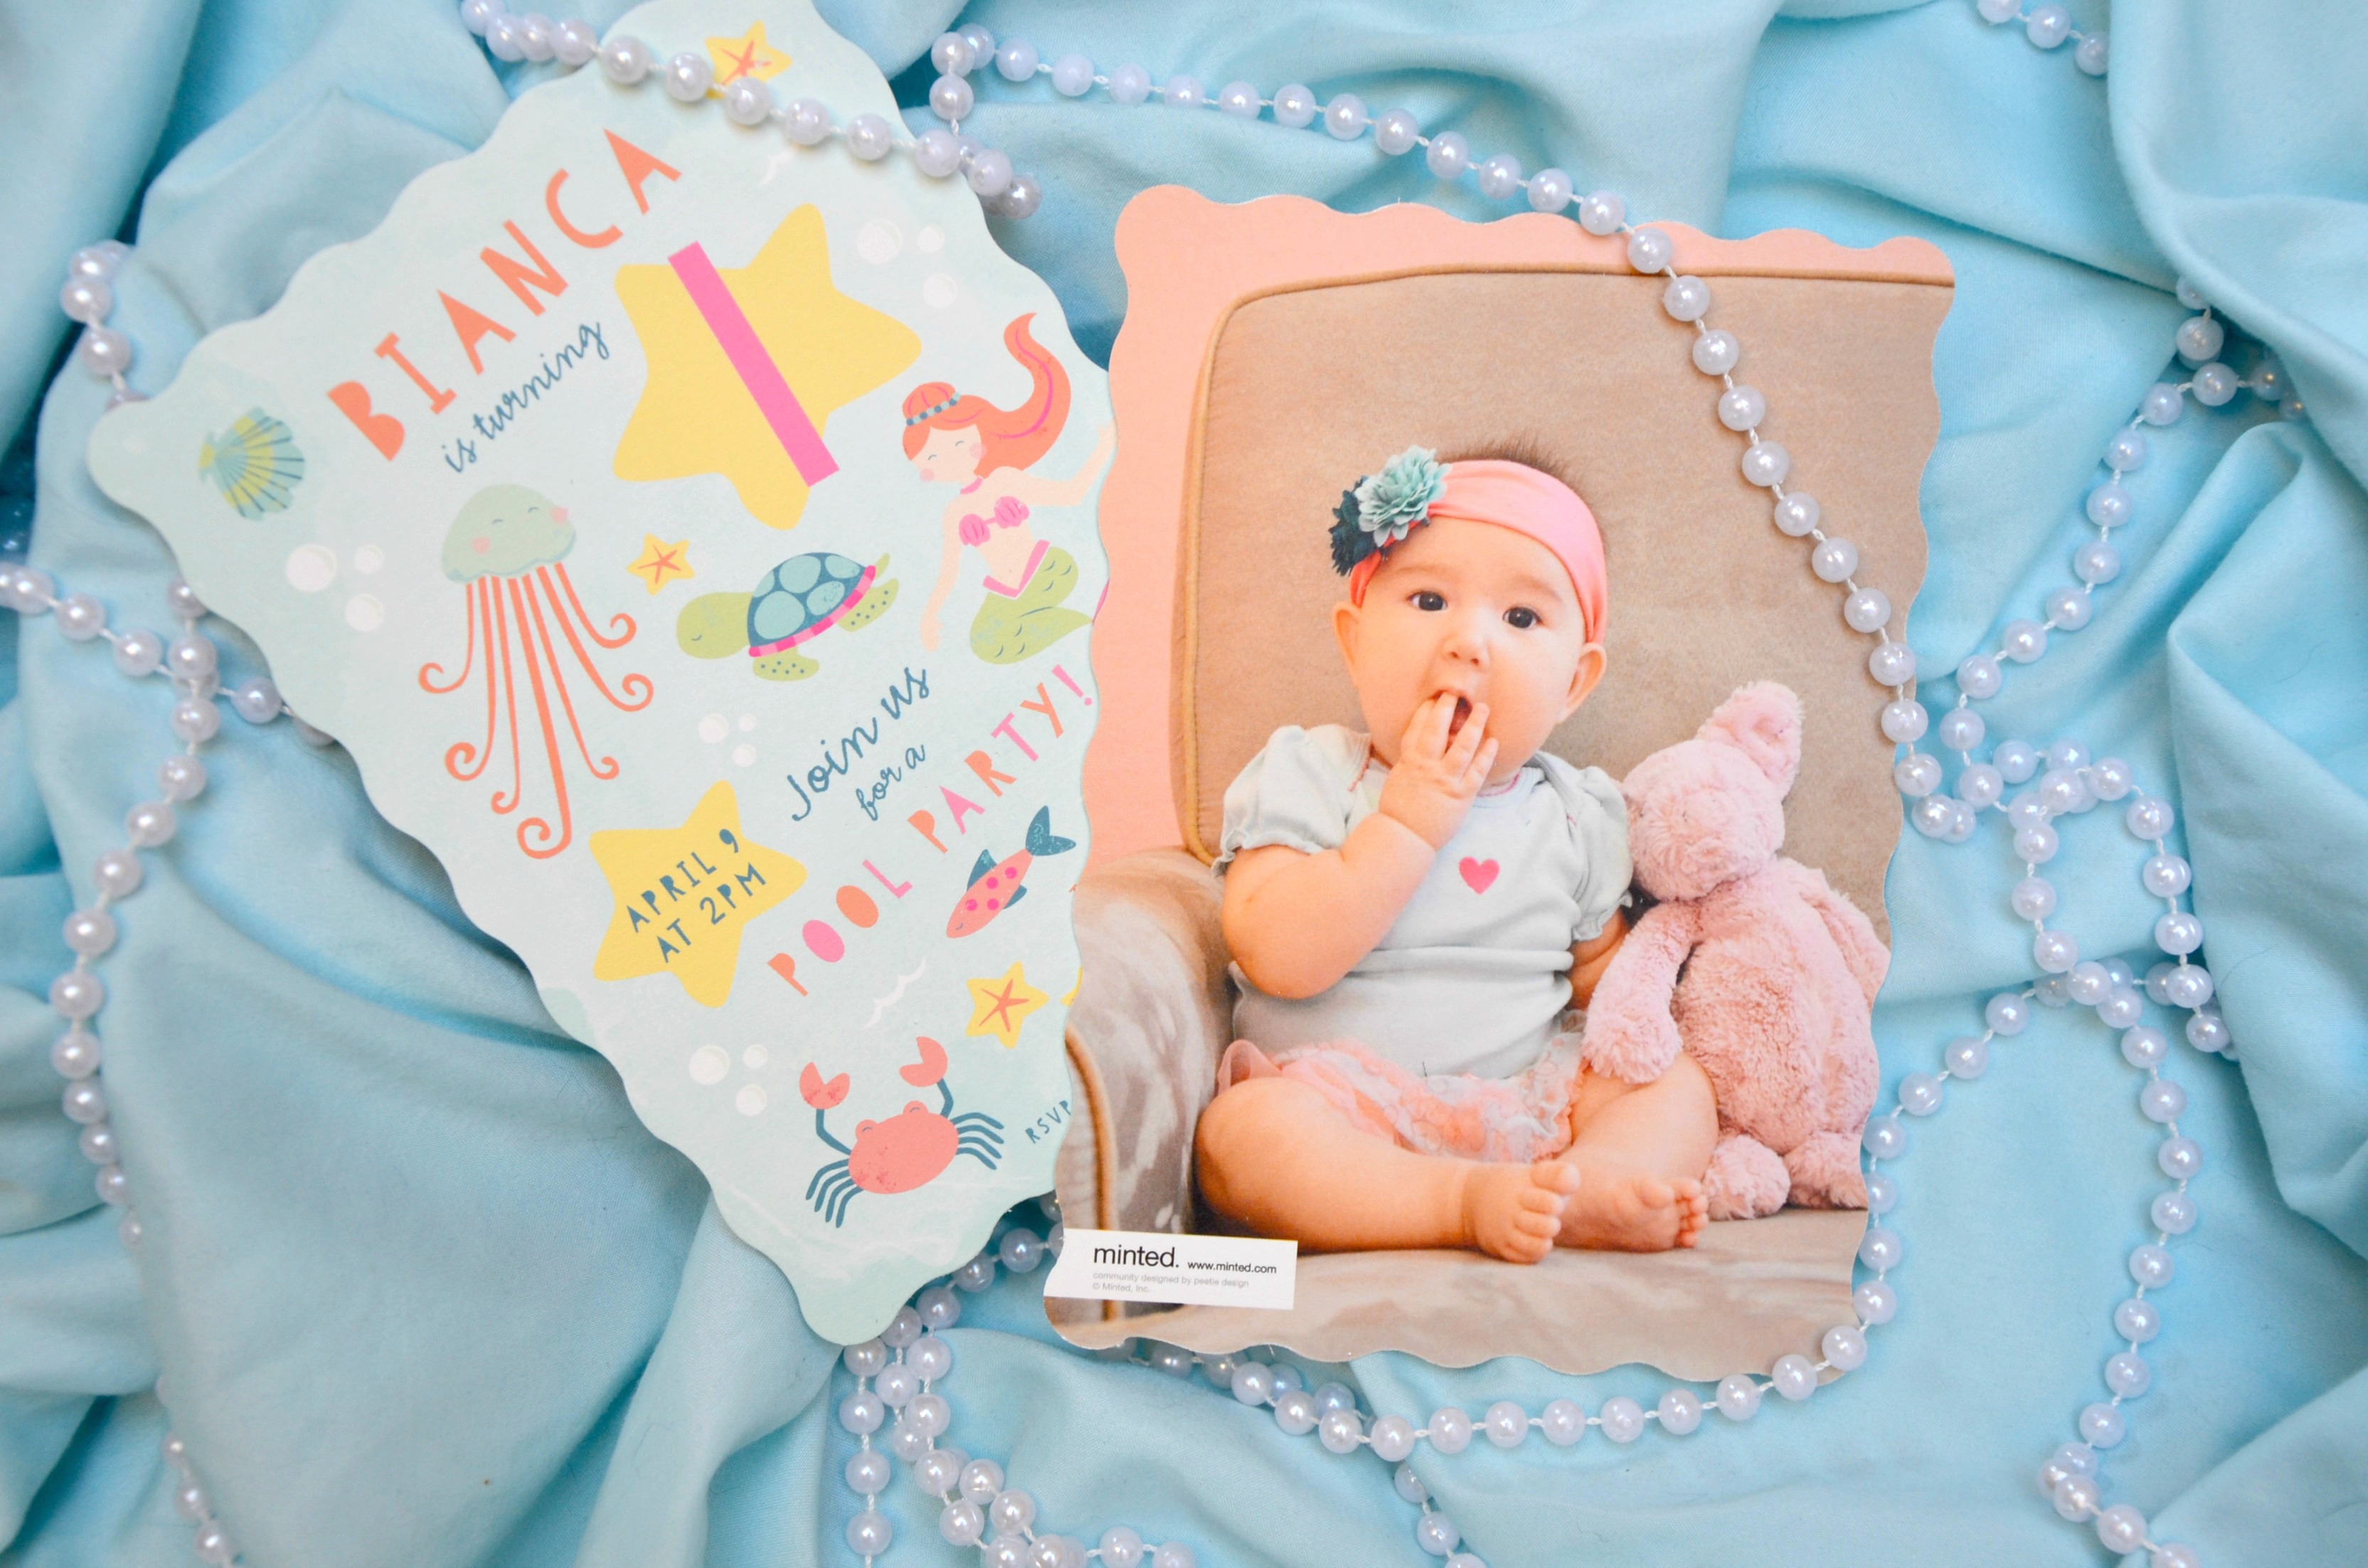 First Birthday Mermaid Party Inspiration Invitations by Minted.com